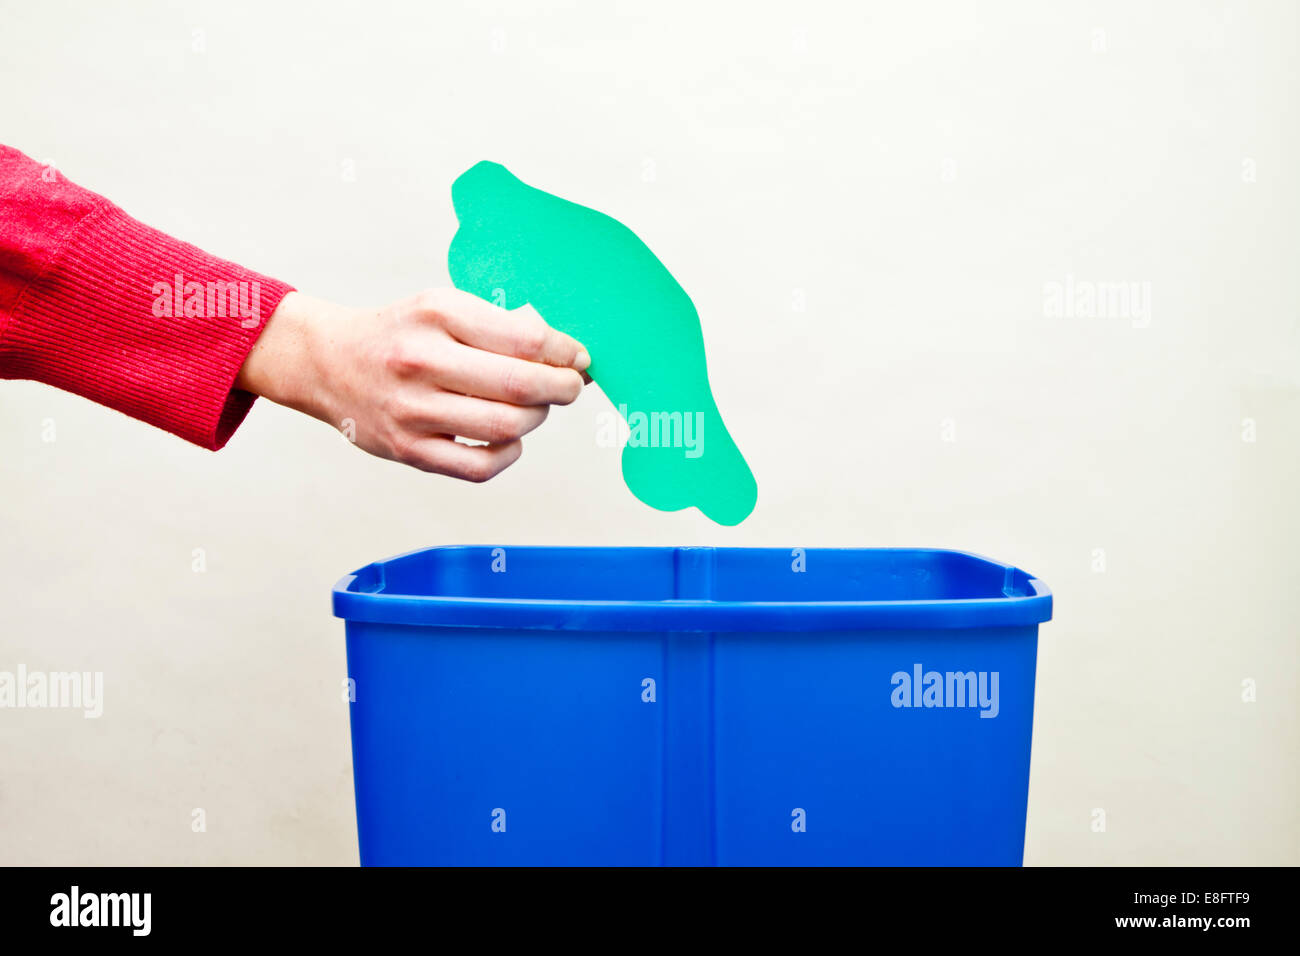 Woman's hand dropping car shape paper cut out into recycling bin Stock Photo